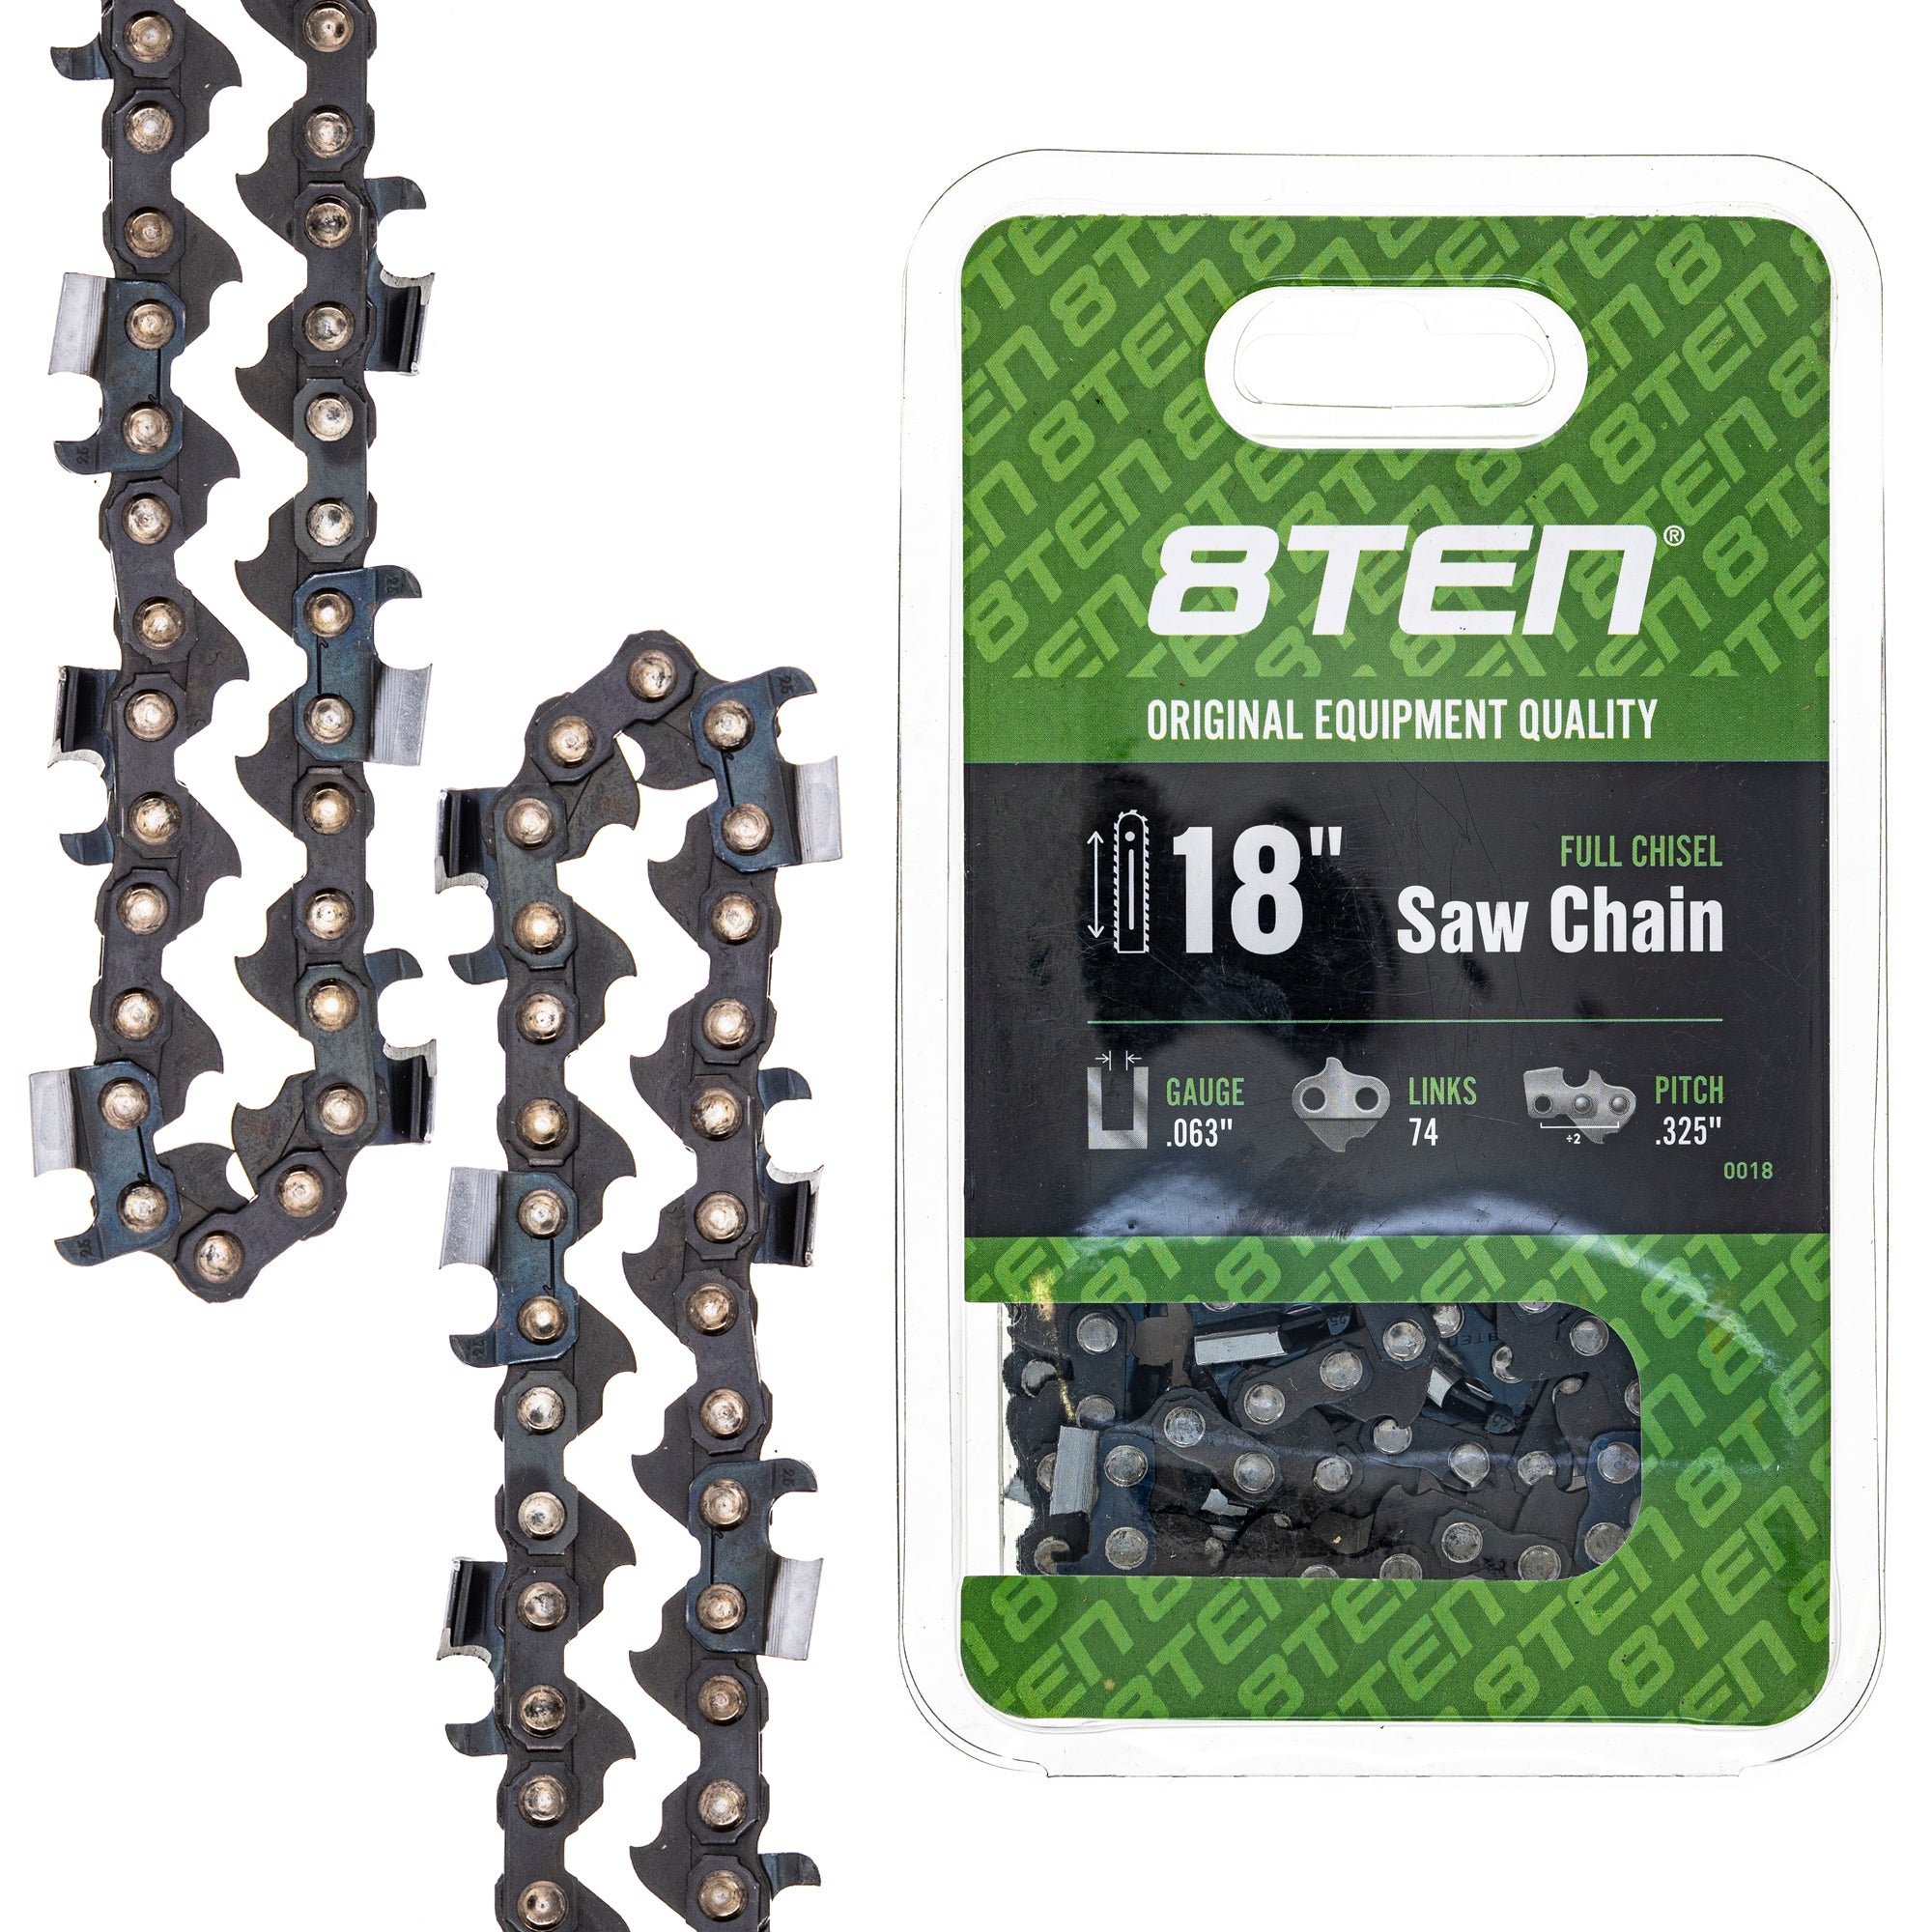 Chainsaw Chain 18 Inch .063 .325 62DL for zOTHER Stens Oregon GB K3L-74E J63C-1PL74 8TEN 810-CCC2230H